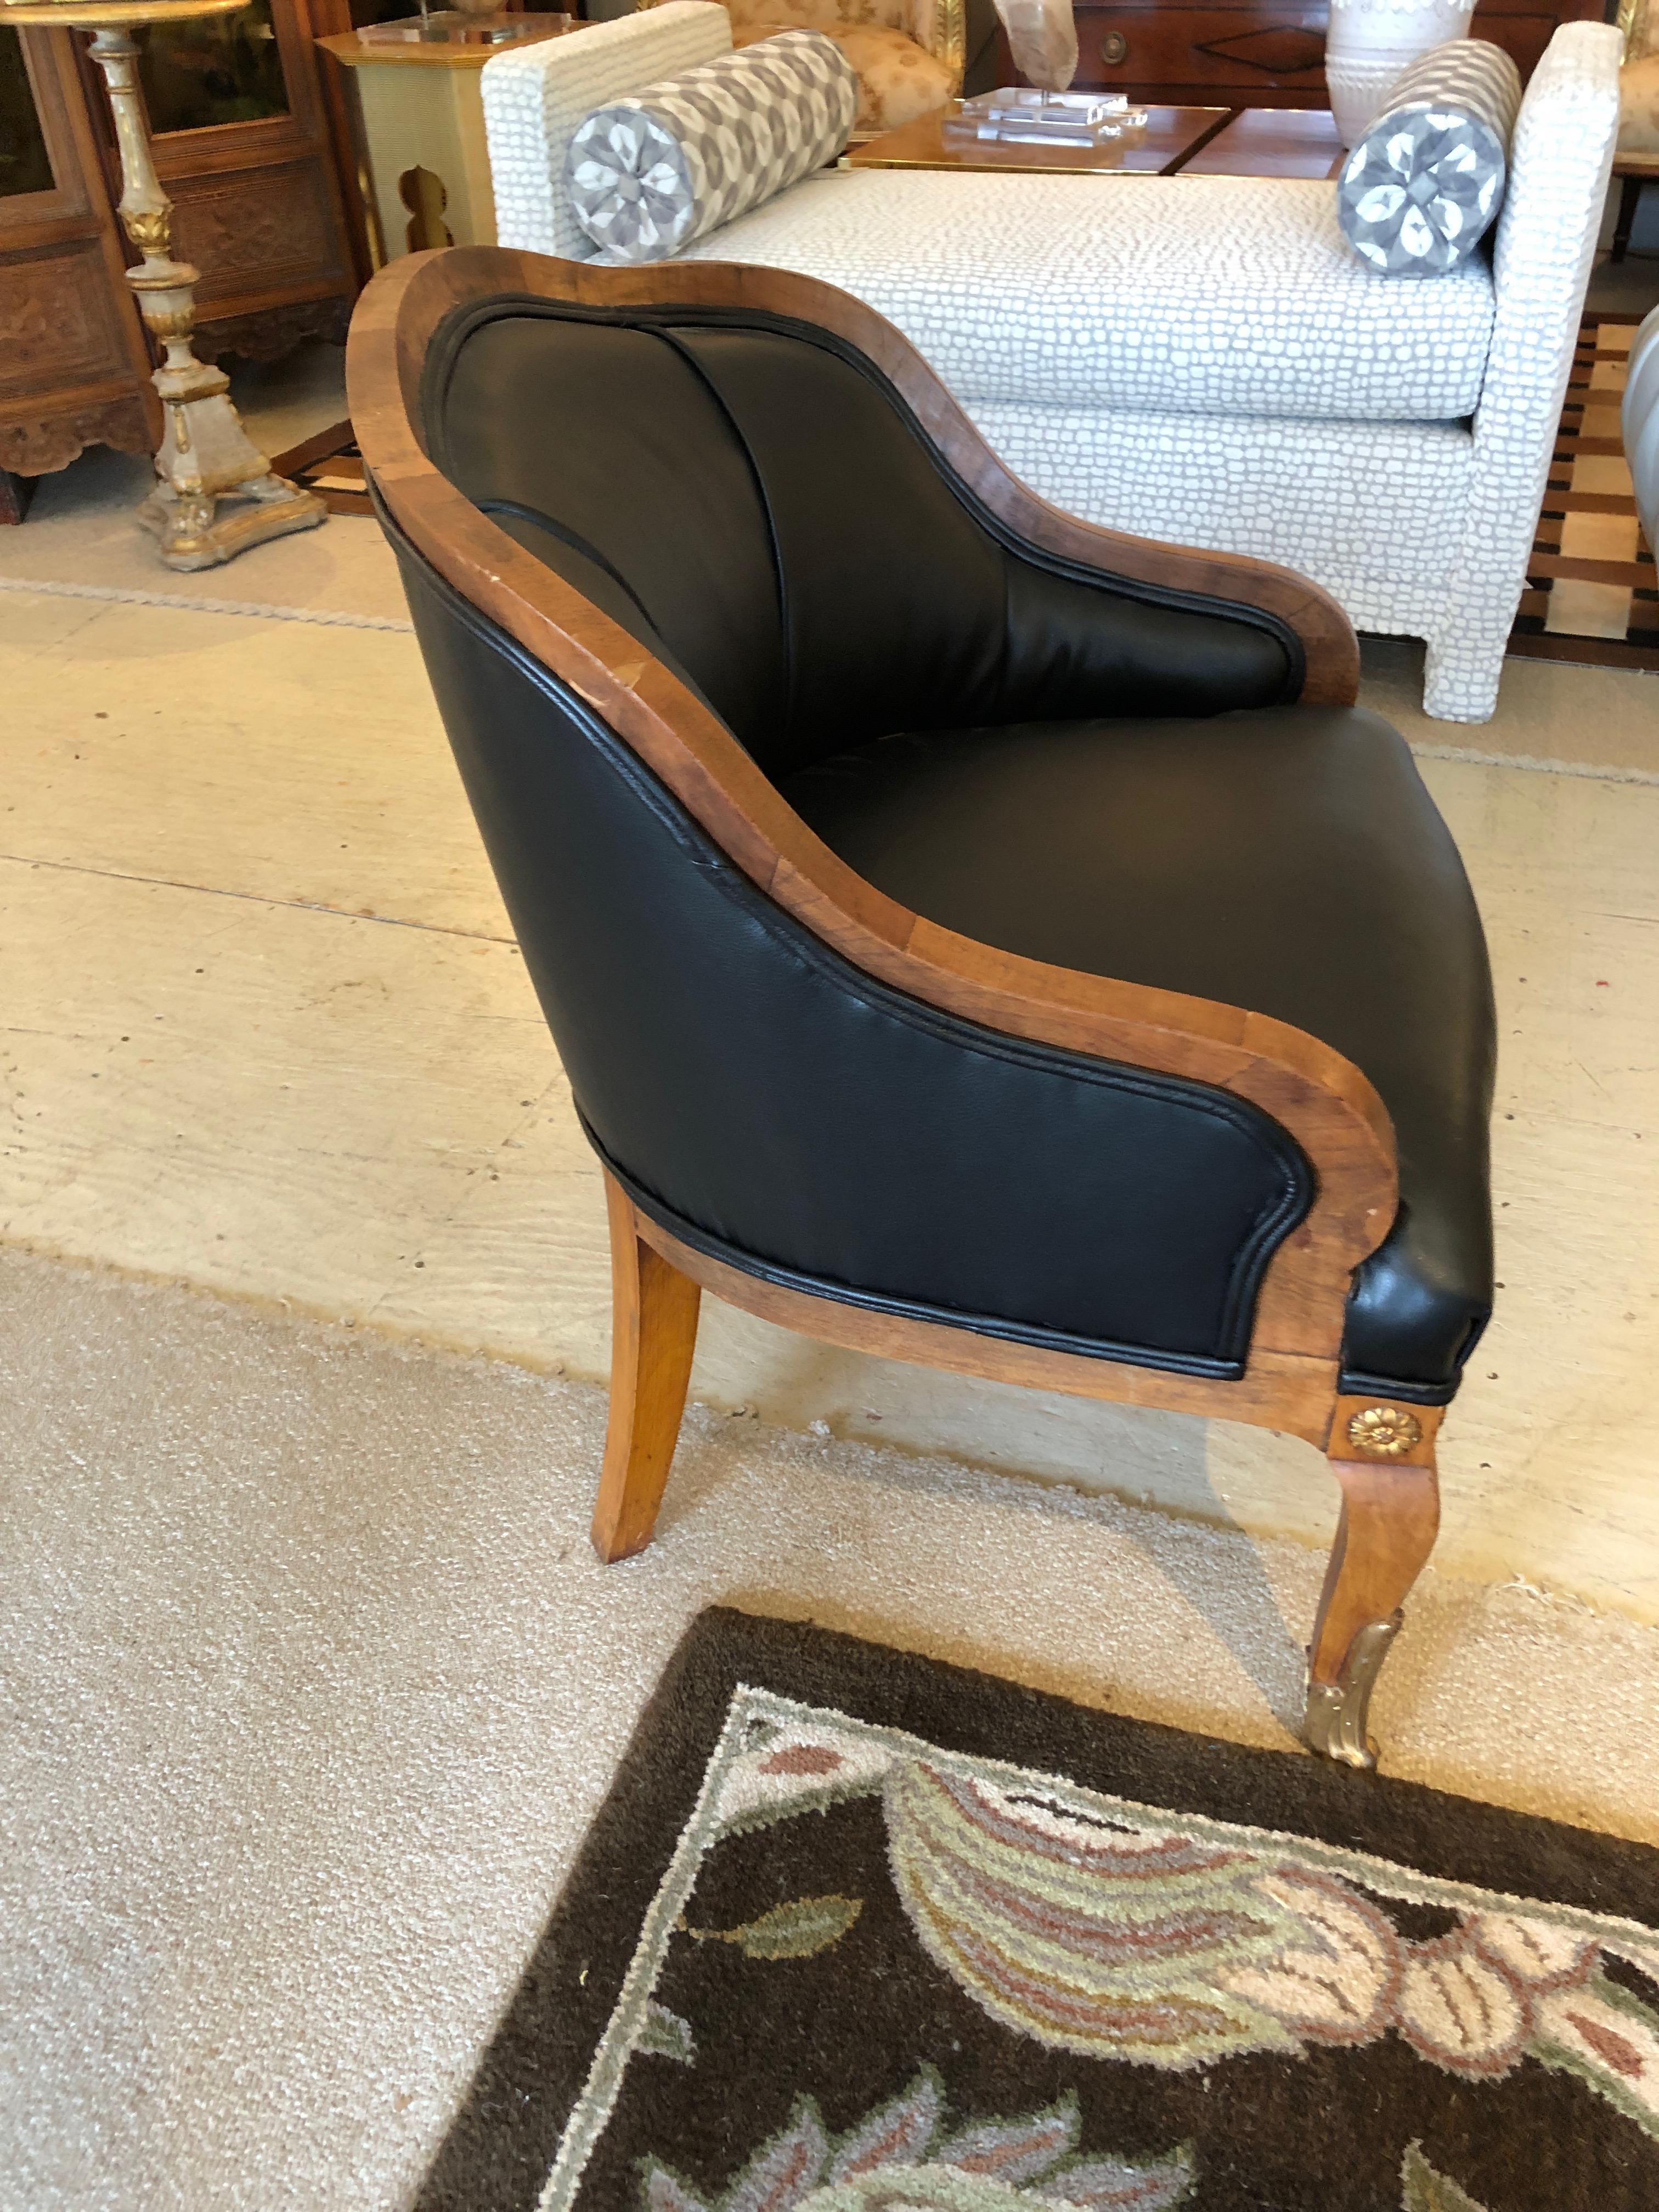 A fabulous club or library chair, compact with a curved back and cabriole legs, having handsome bronze rosettes and caps on the feet. Recently updated and made more handsome with faux leather black upholstery that passes for the real thing.